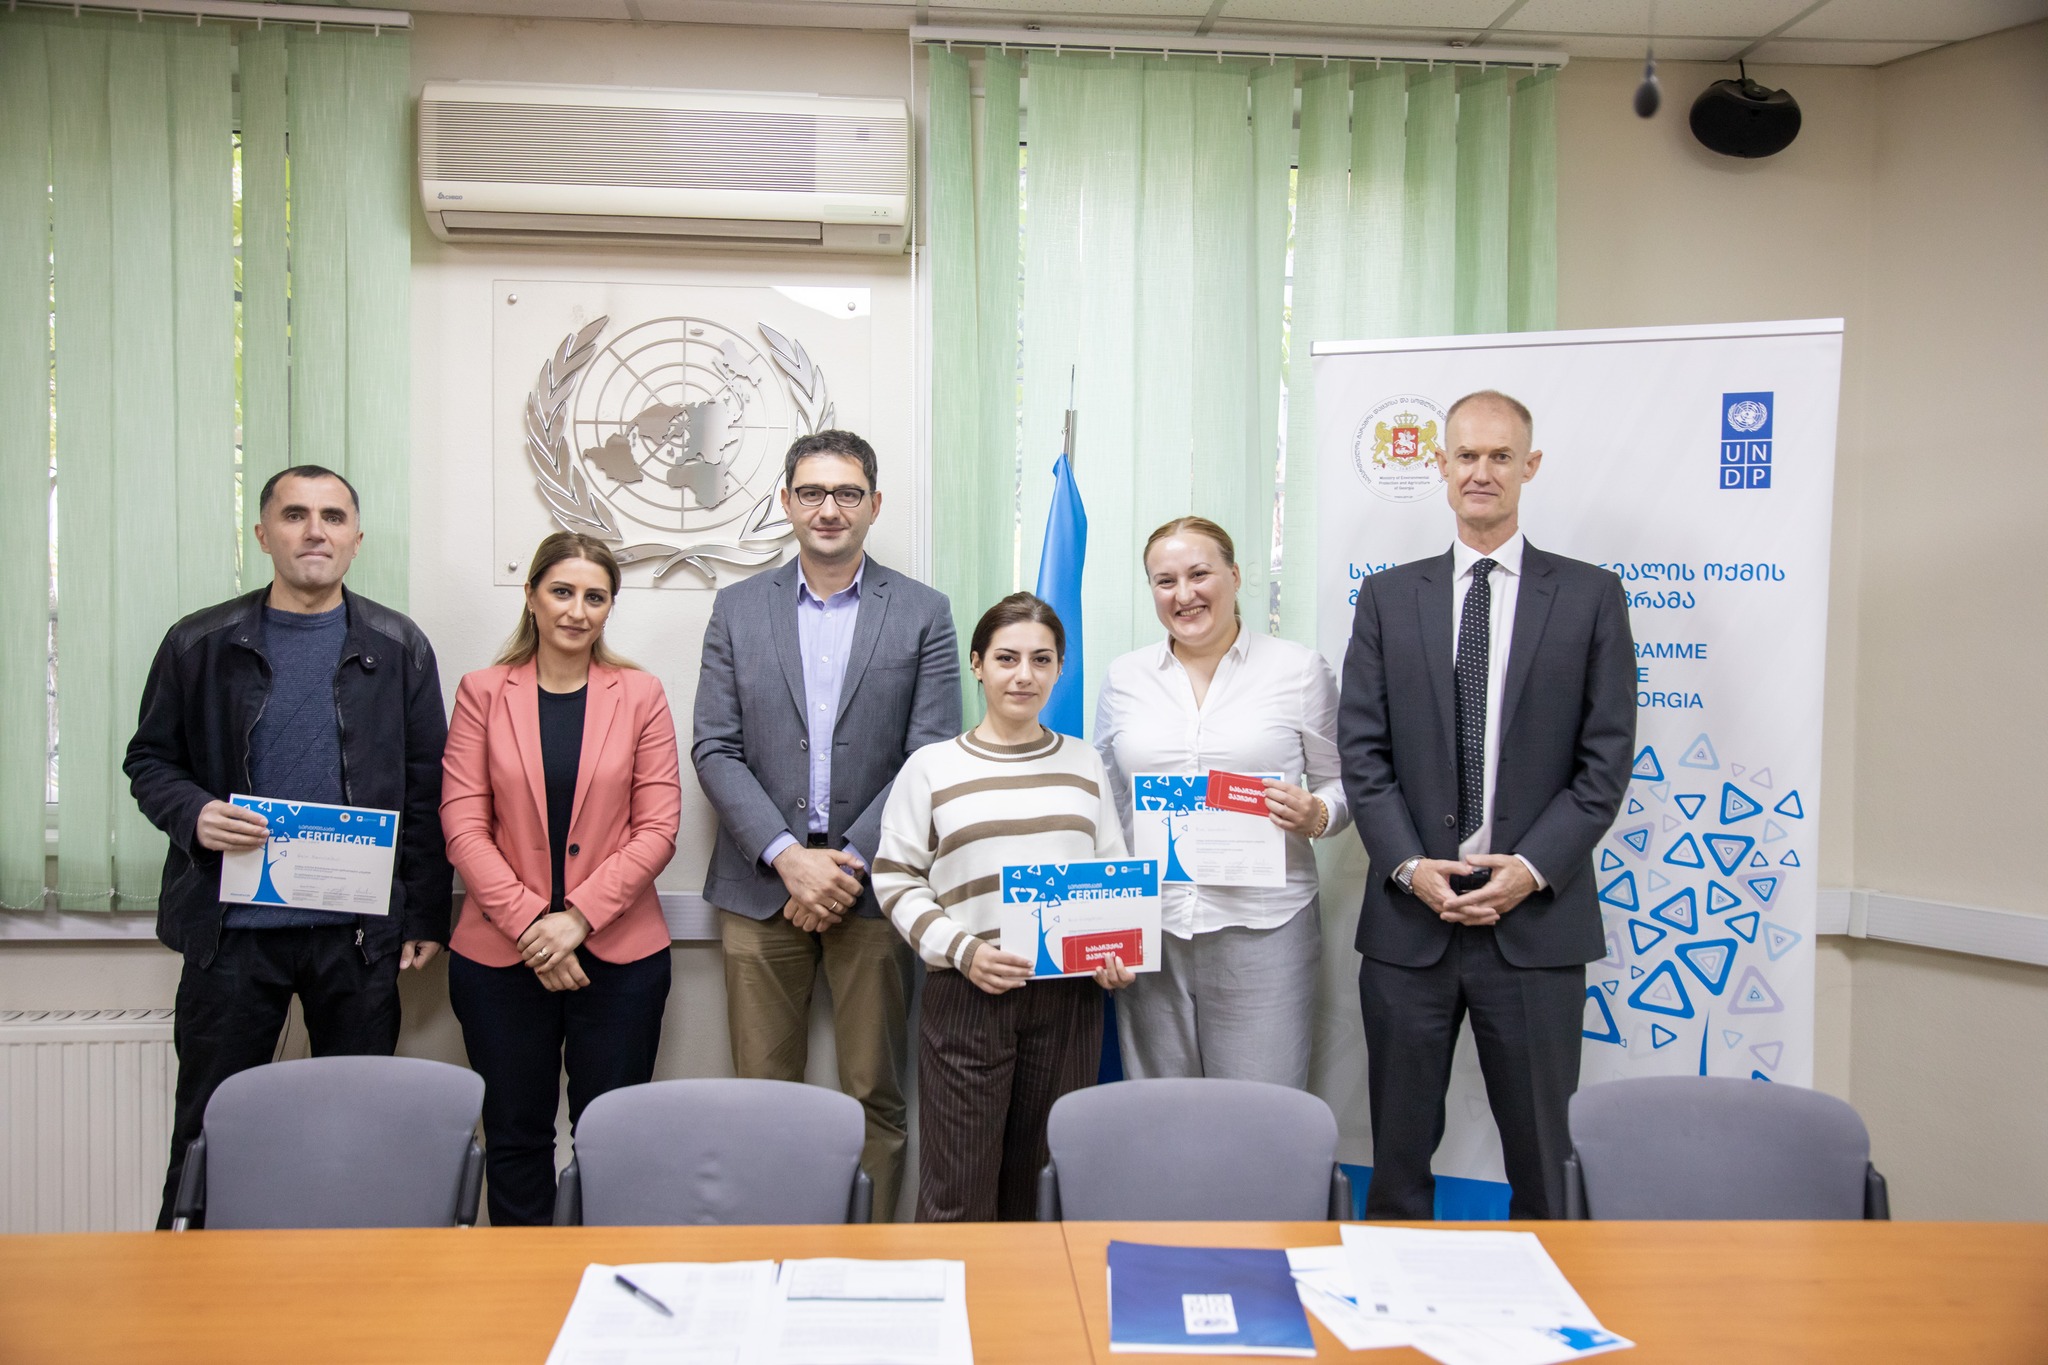 The winners of the media contest "Together to Protect the Ozone Layer" were awarded 